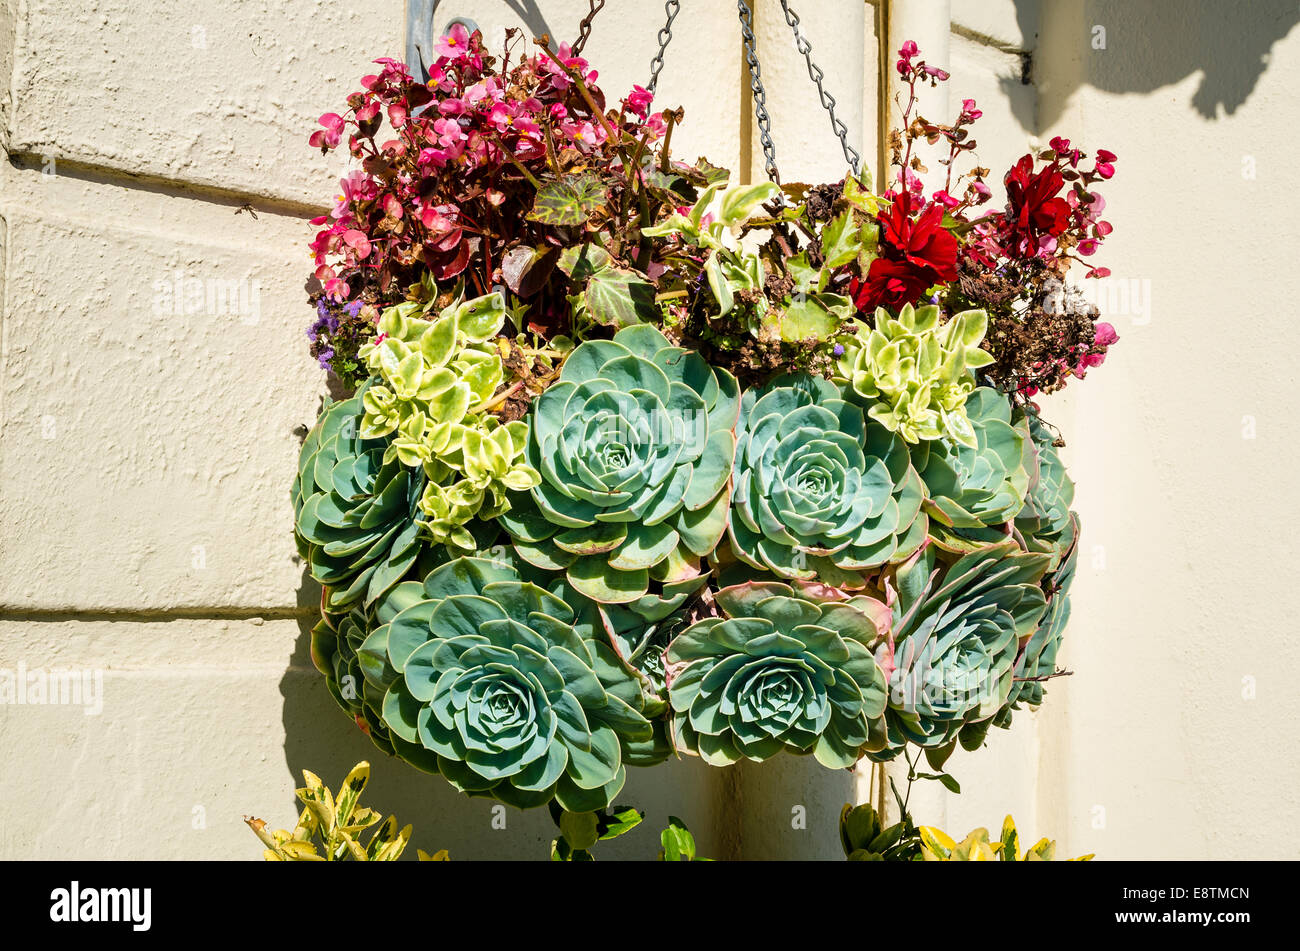 Hanging flower basket with Echeveria planting Stock Photo